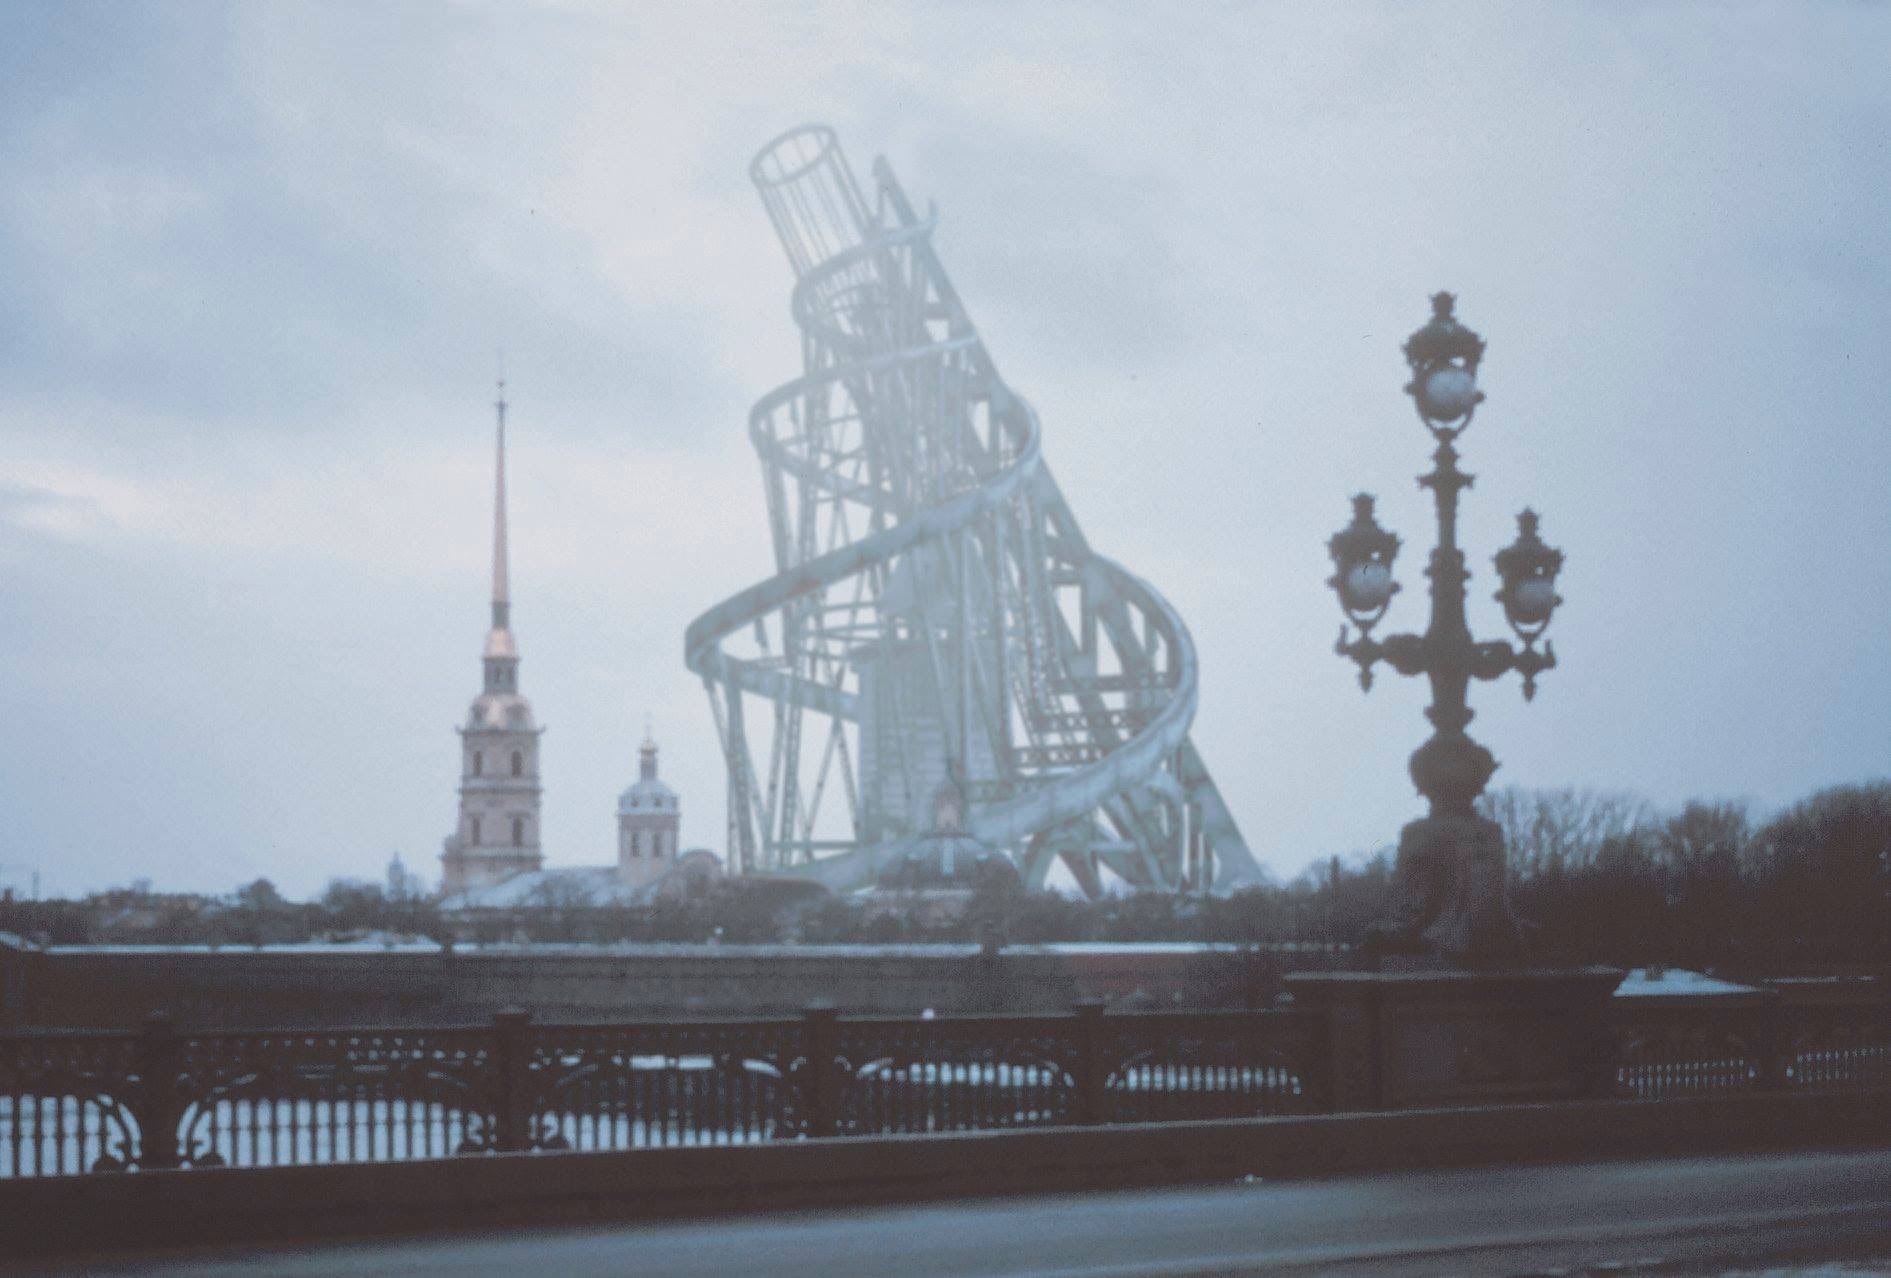 A render of what the tower would have looked like in the St. Petersburg skyline, so fuzzy you could mistake it for something real. Taken from an animated clip by Takehiko Nagakura, who focuses on visualizing unbuilt monuments.